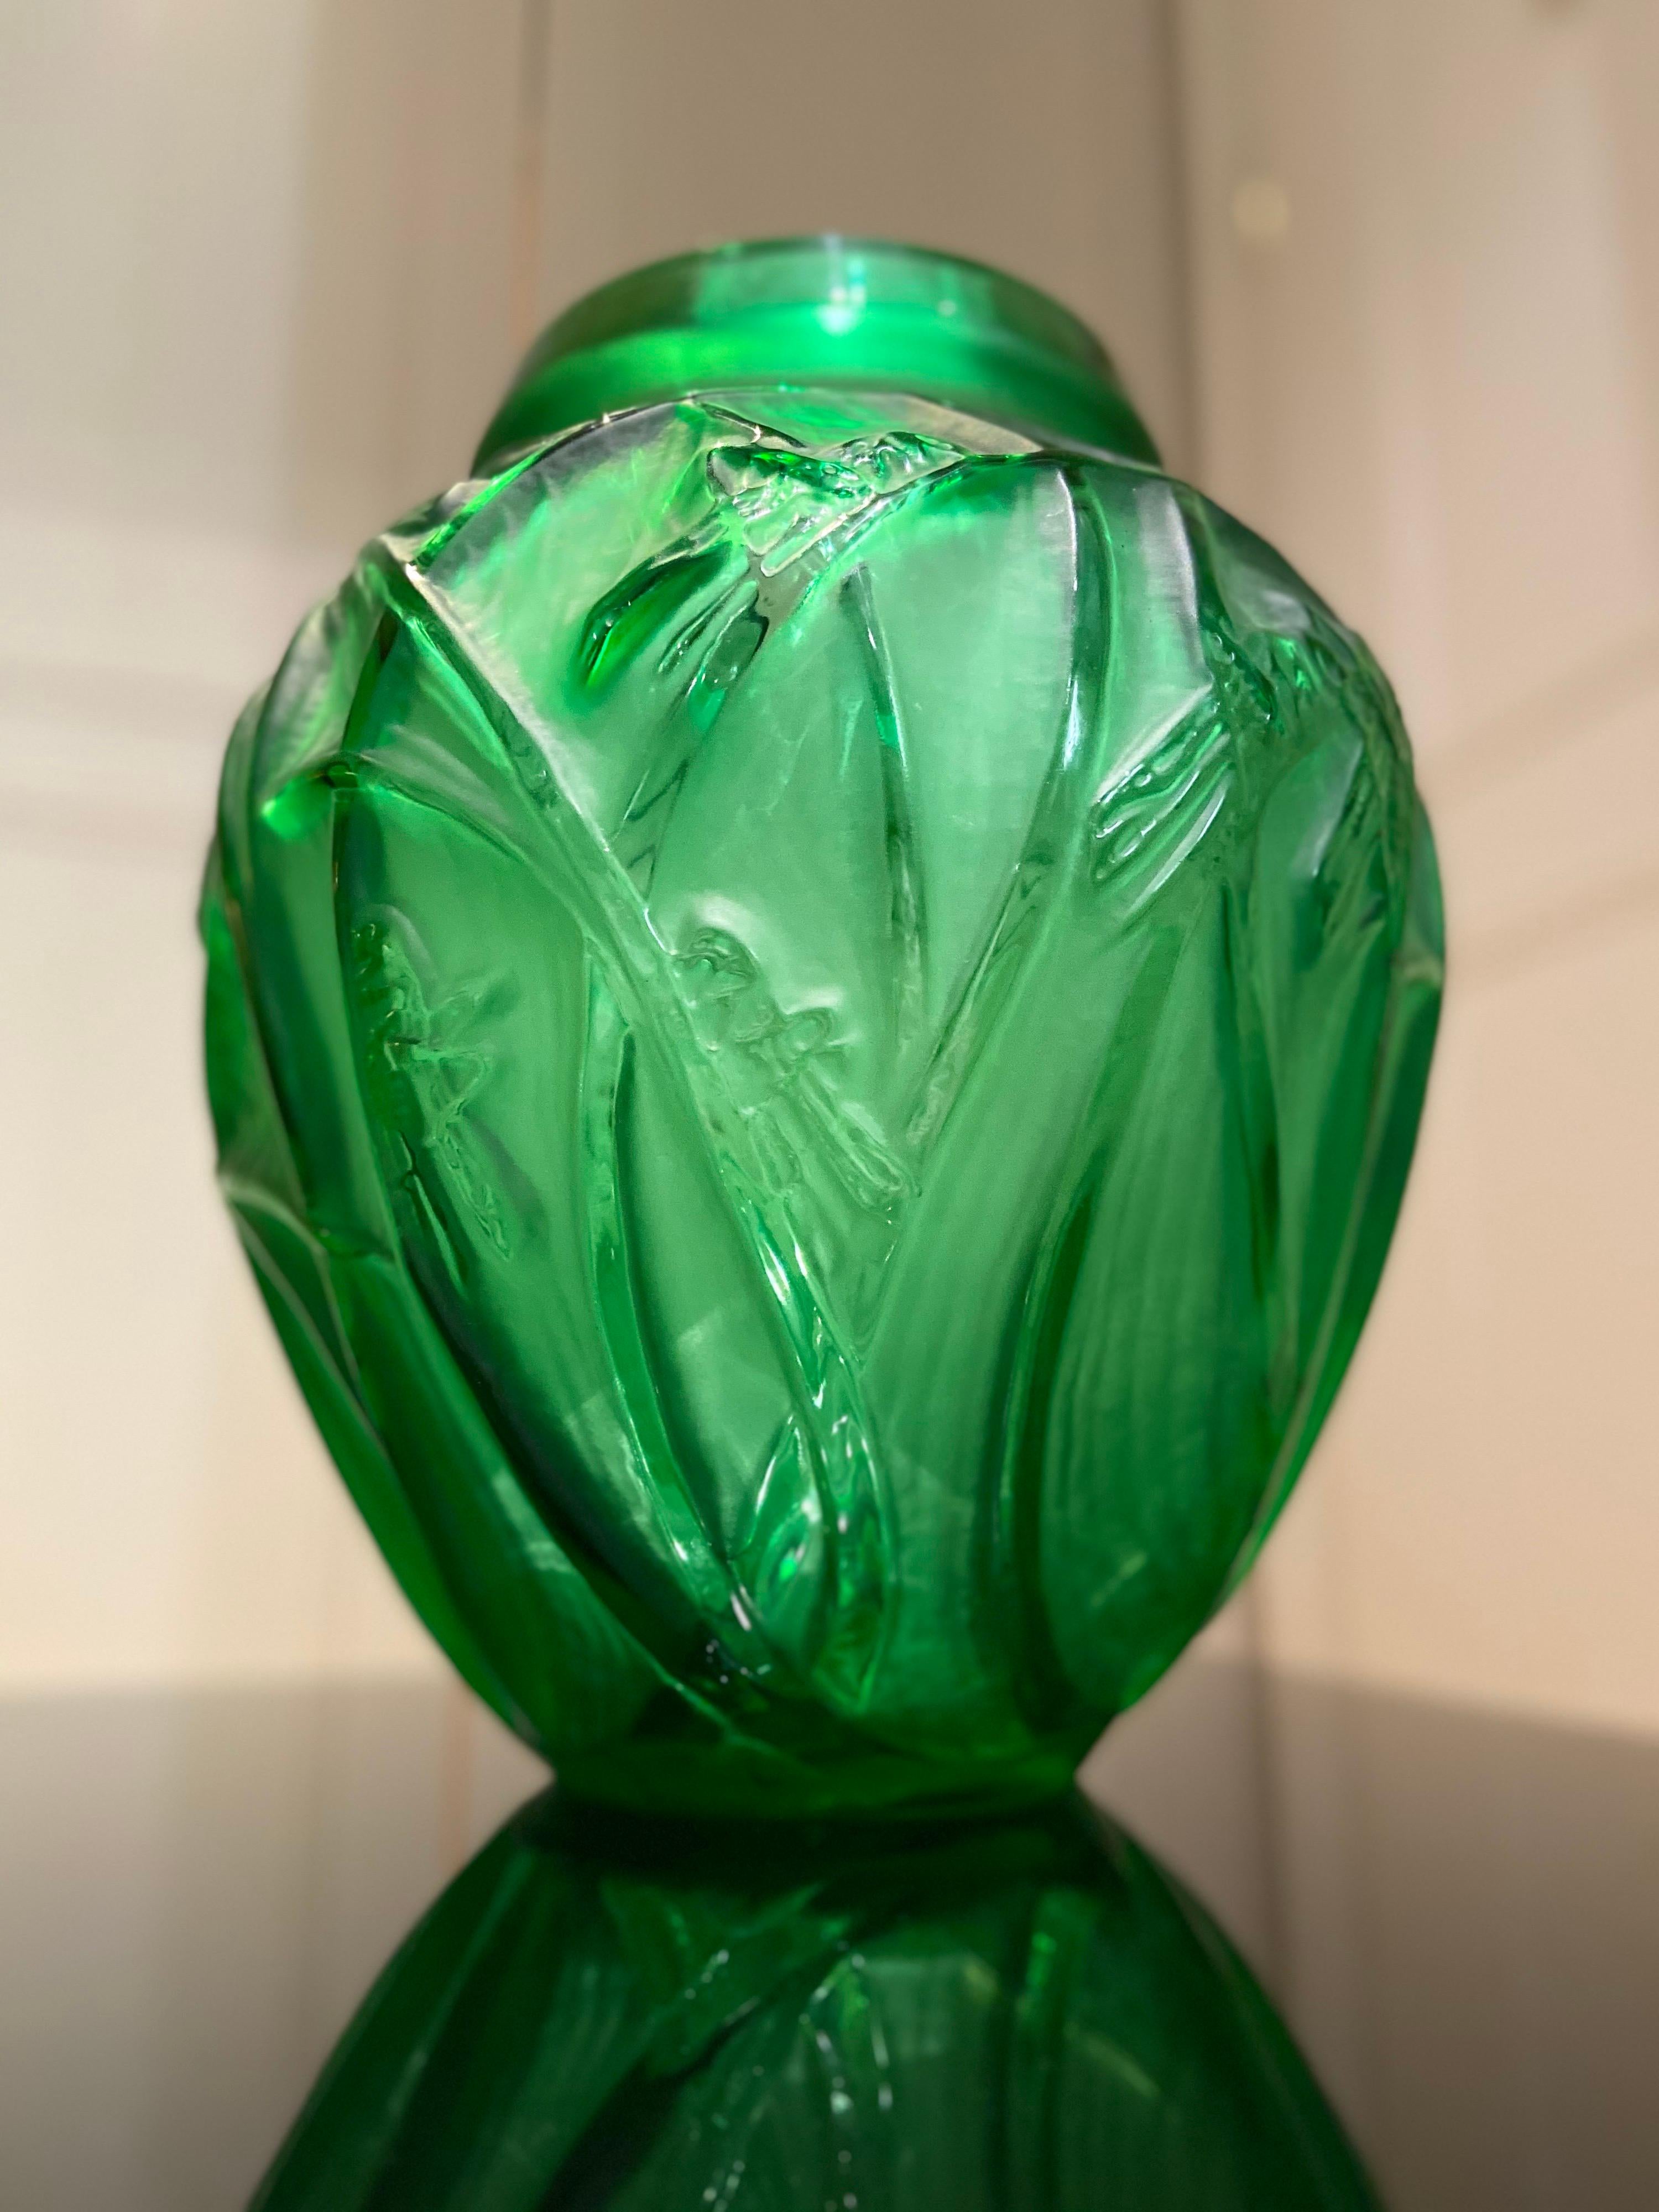 Rare electric green vase by René Lalique ‘Sauterelles’

 Grasshoppers vase made in molded frosted glass with green patina covered all over with a design of grasshoppers sitting on leaves.

 Félix Marcilhac, René Lalique - Catalogue Raisonné de